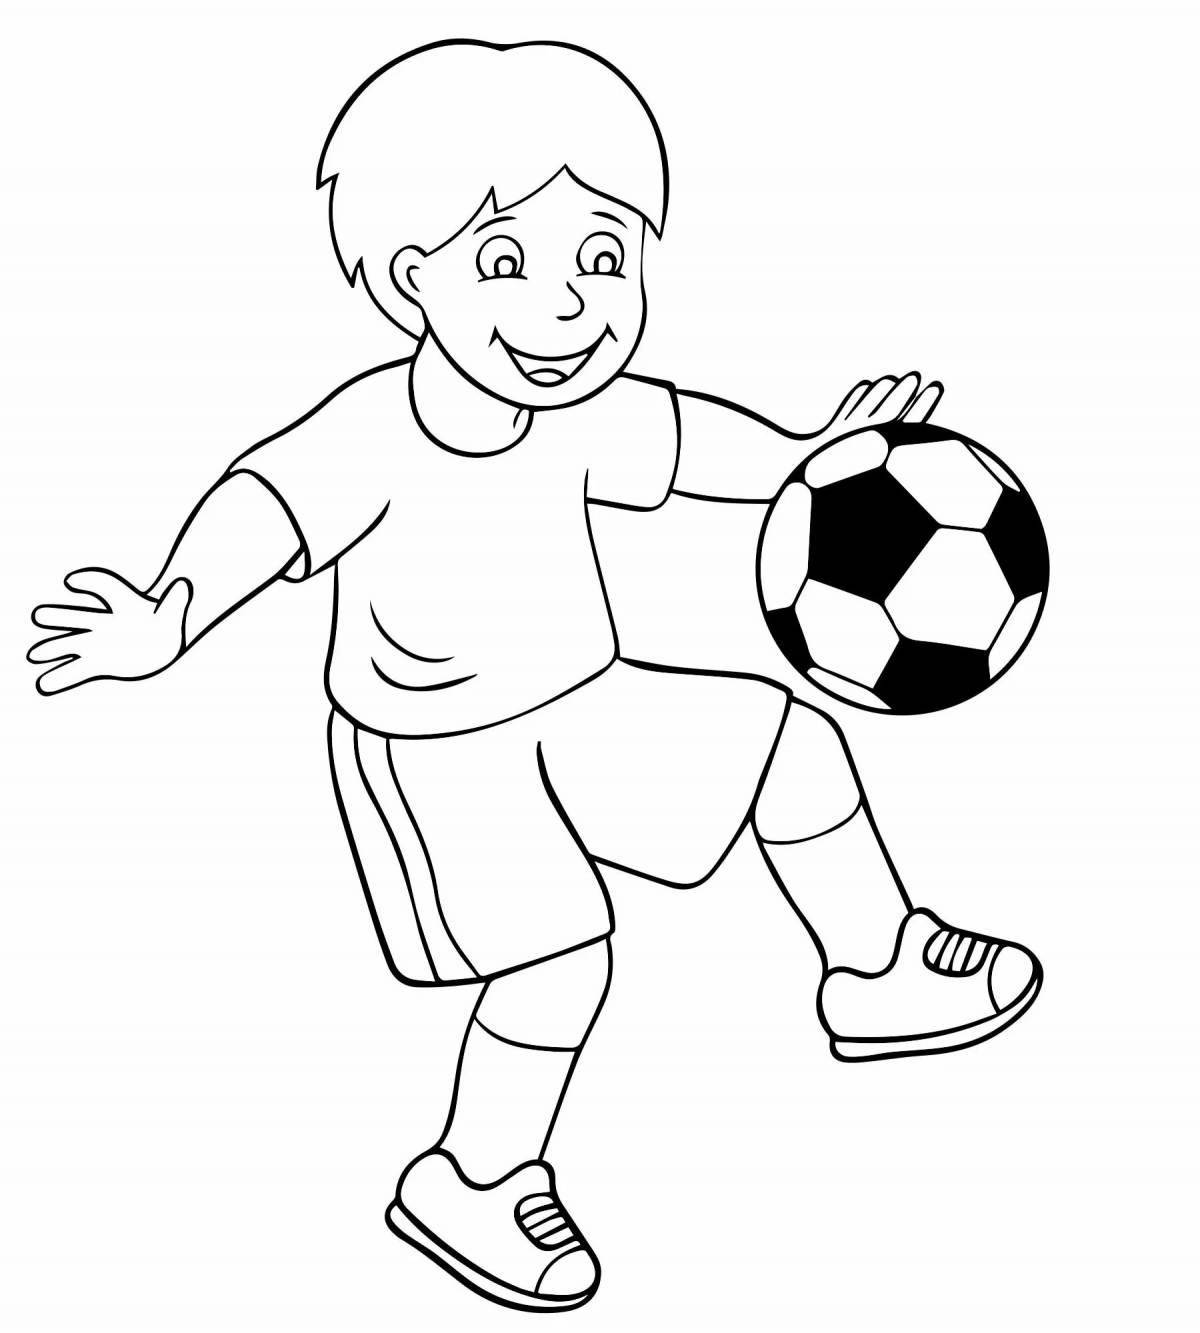 Gorgeous soccer player coloring page for kids